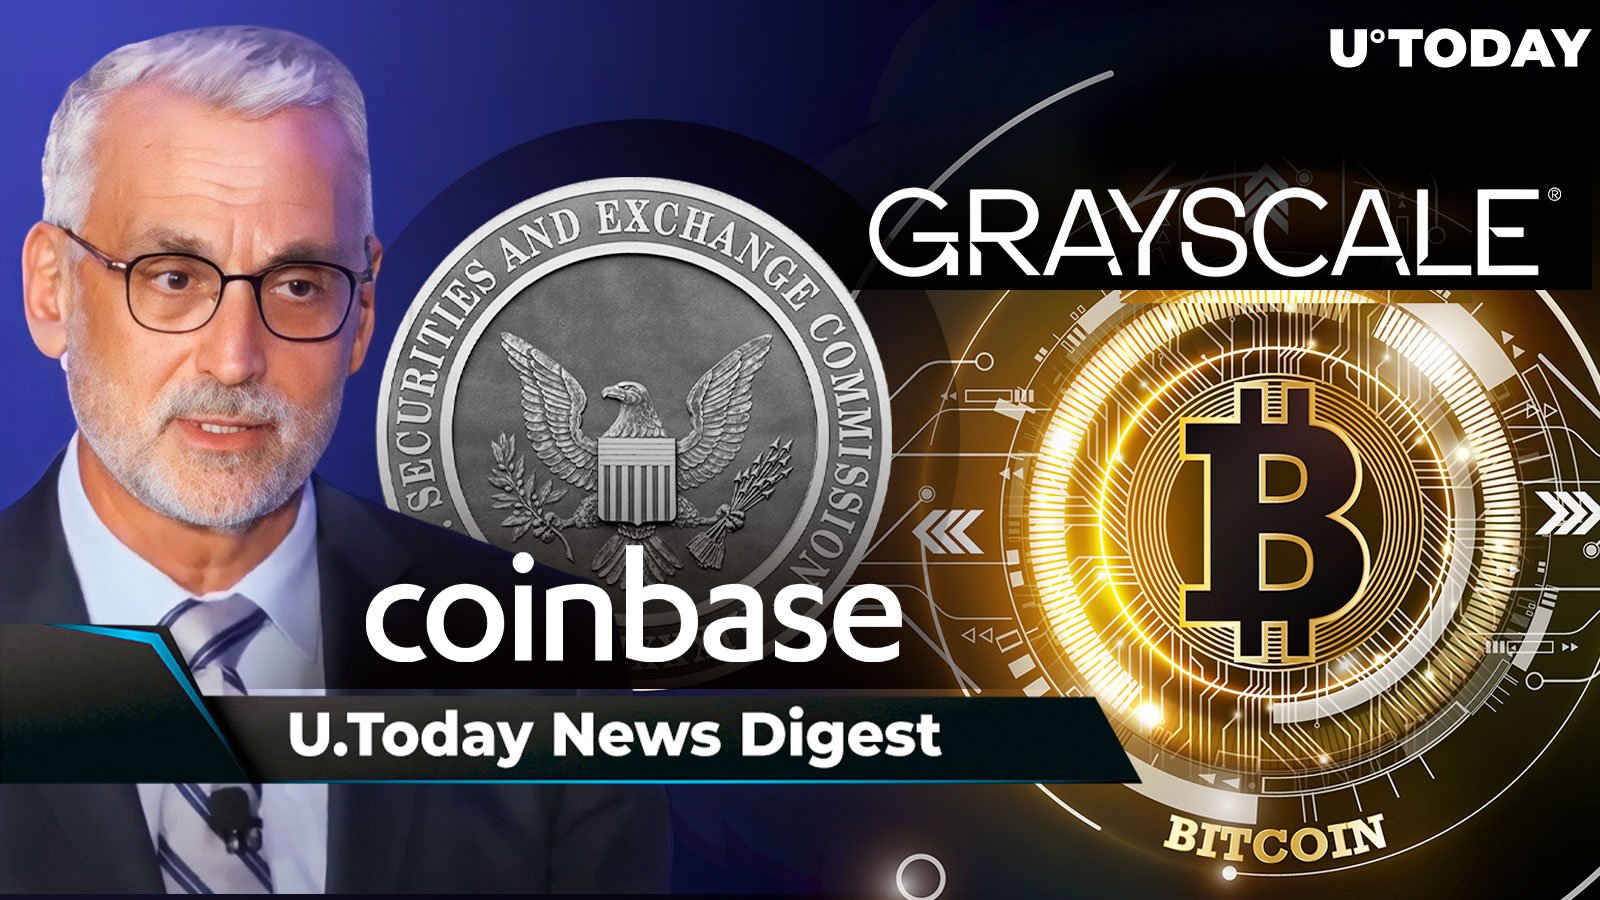 Grayscale Dumps $2.14 Billion in BTC, Ripple CLO Exposes Major Misconduct in Coinbase v. SEC Case, Gemini's Cryptic XRP Posts Stir Community: Crypto News Digest by U.Today